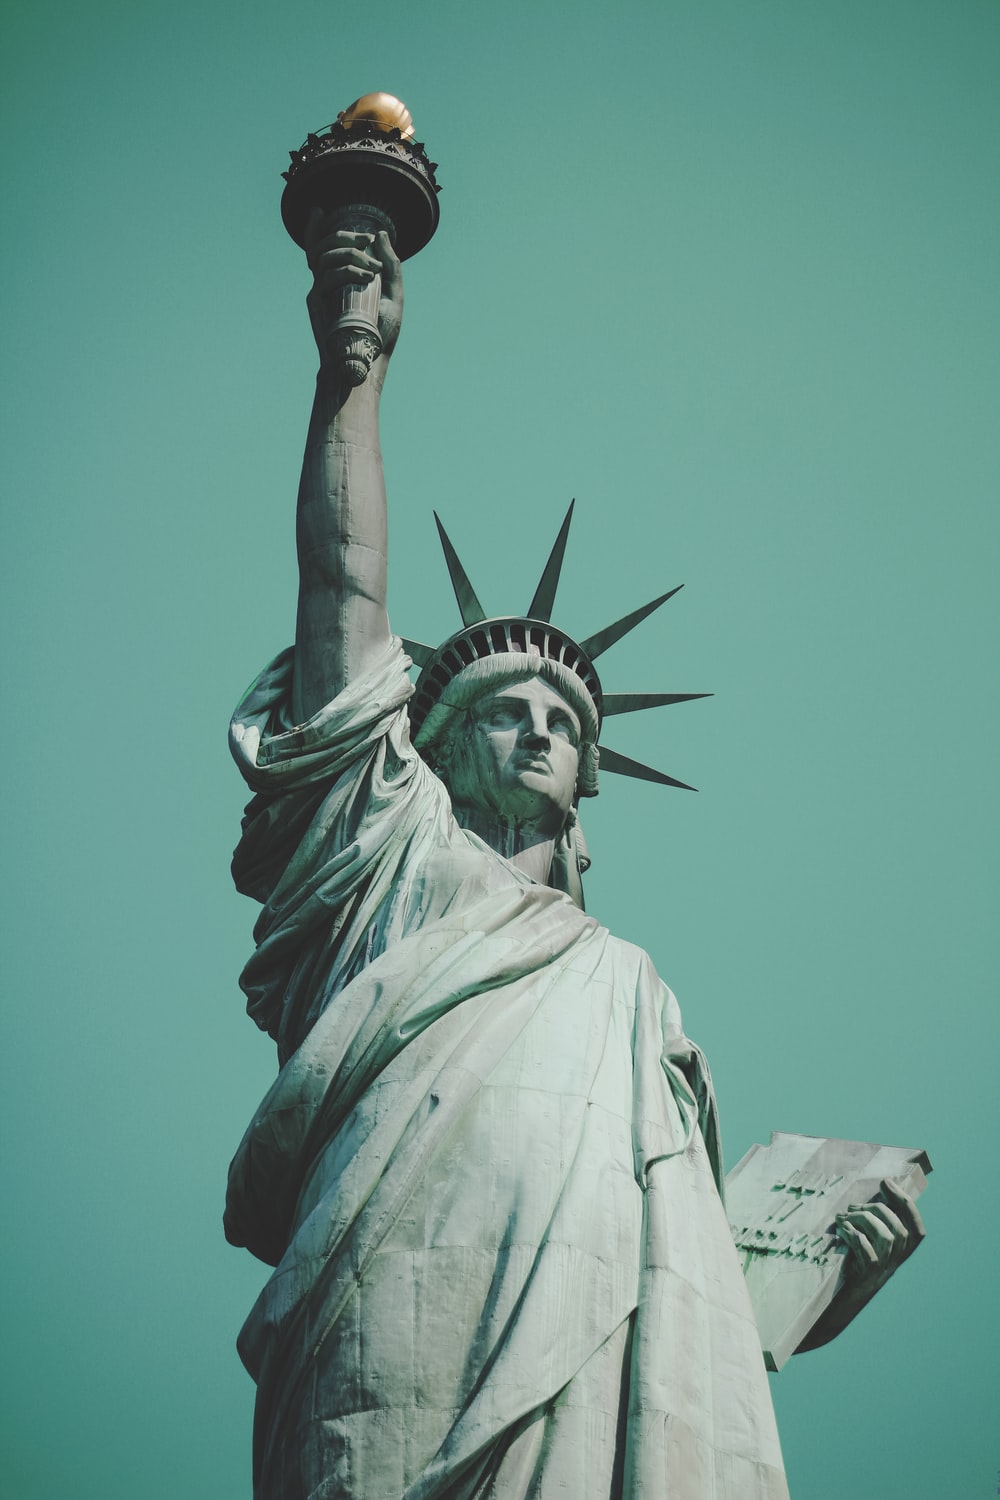 HQ The Statue Of Liberty Picture. Download Free Image